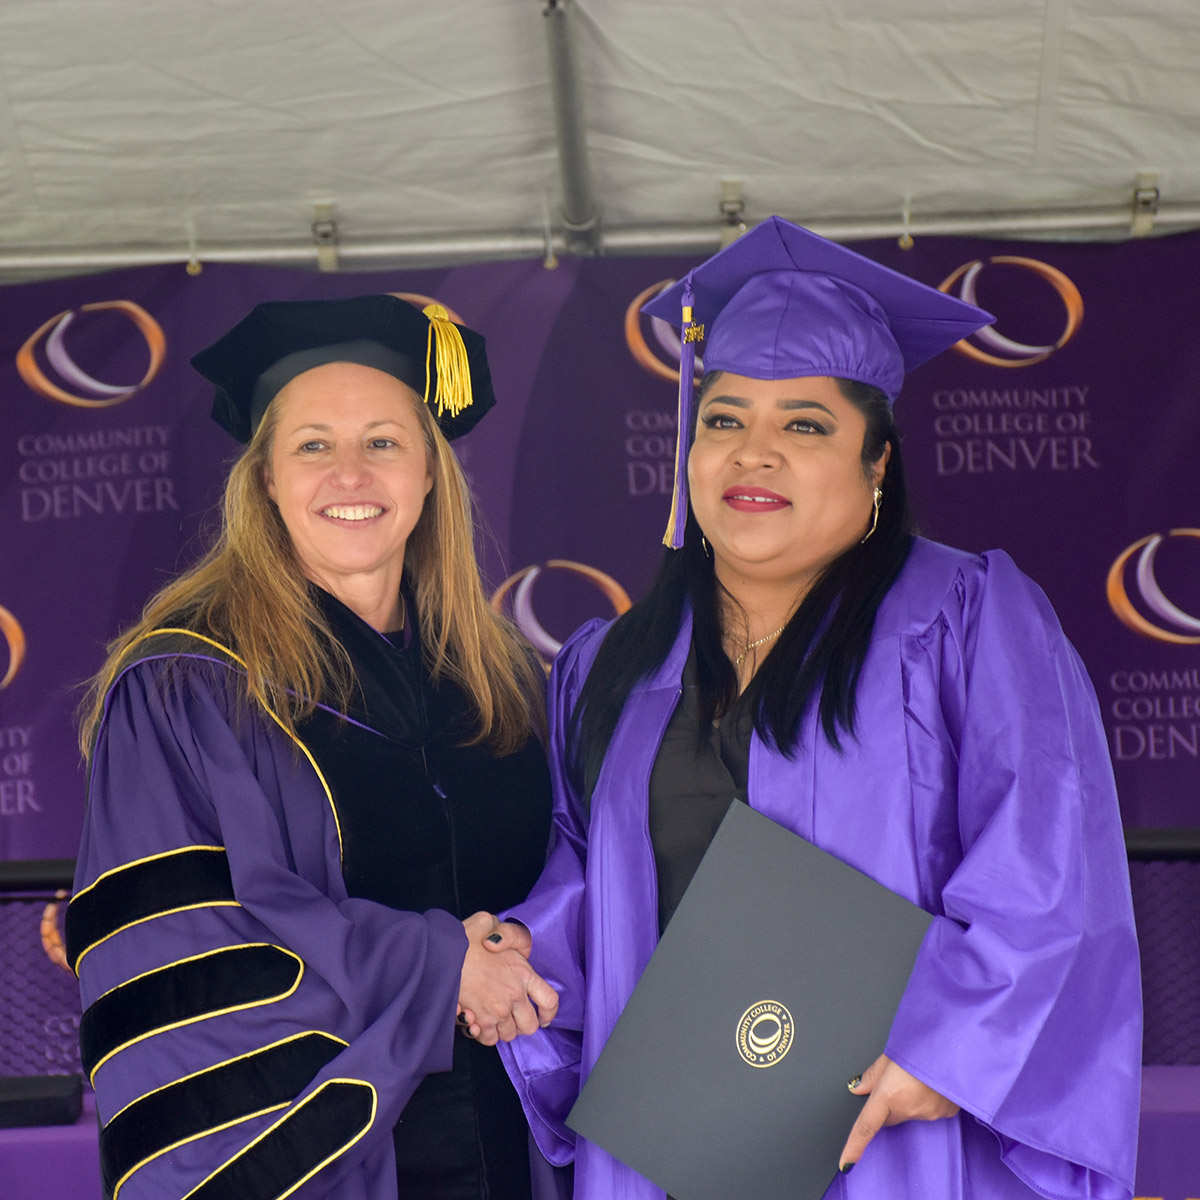 CCD President, Dr. DeSanctis, shaking hands with a female graduate